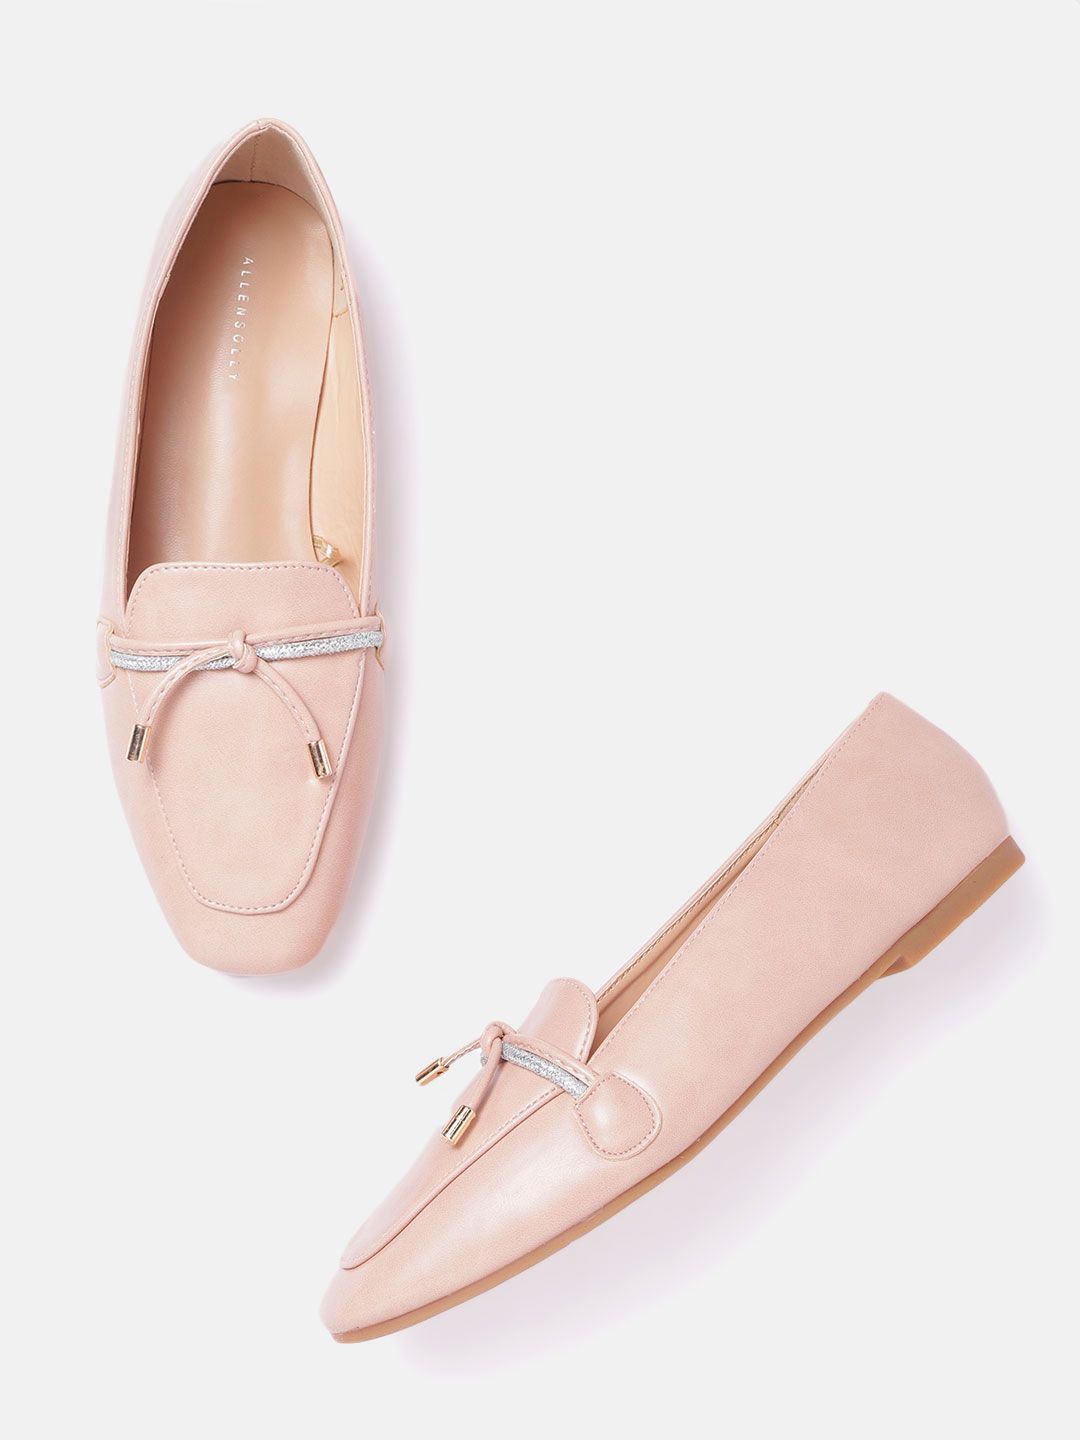 Allen Solly Women Peach-Coloured Solid Slip-Ons with Knot Detail Price in India